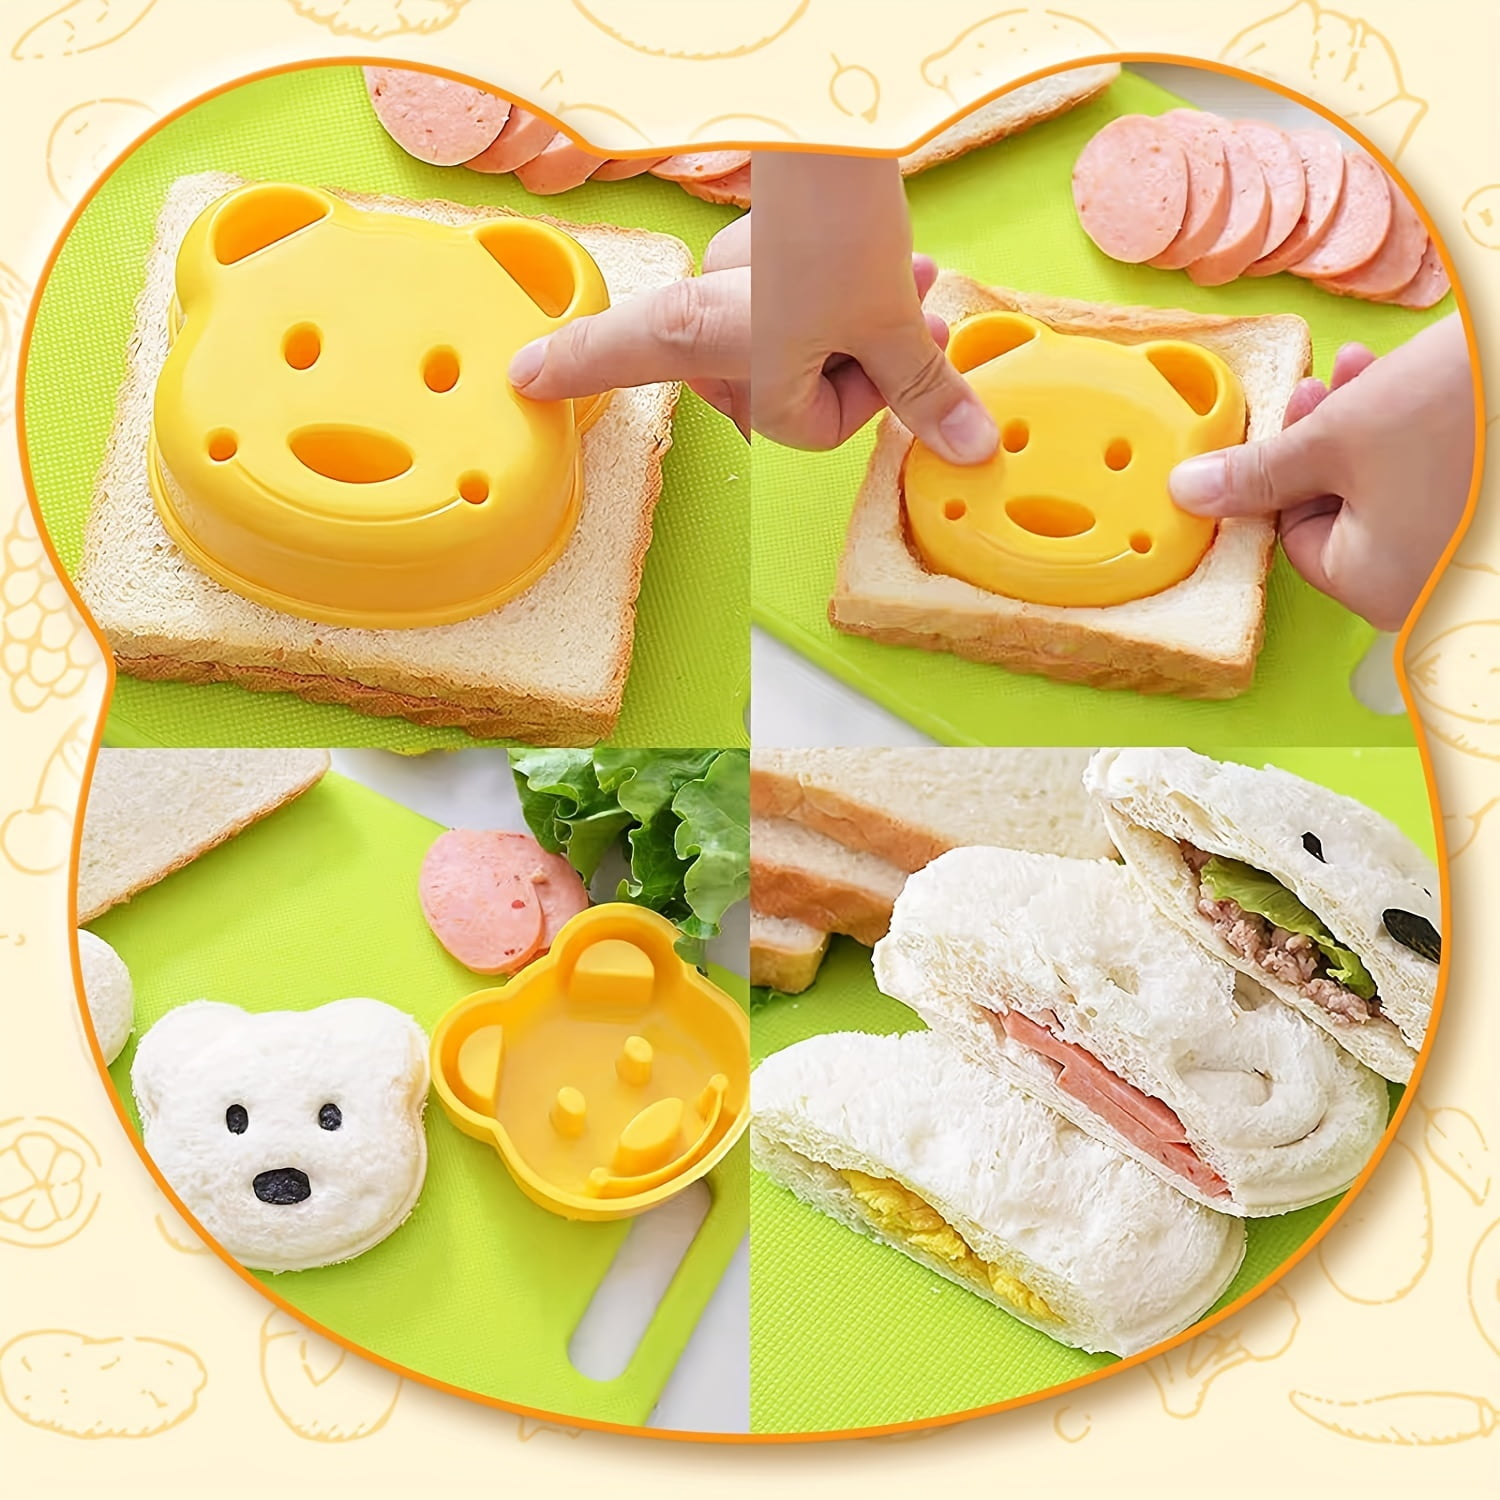  12Pcs Kids Knife Set for Real Cooking, Montessori Kitchen Tools  for Toddlers, Plastic Safe Cooking Utensils with Knives Crinkle Cutter,  Cutting Board Dinosaur Wooden Knife Fruit Sandwich Peeler Molds : Toys